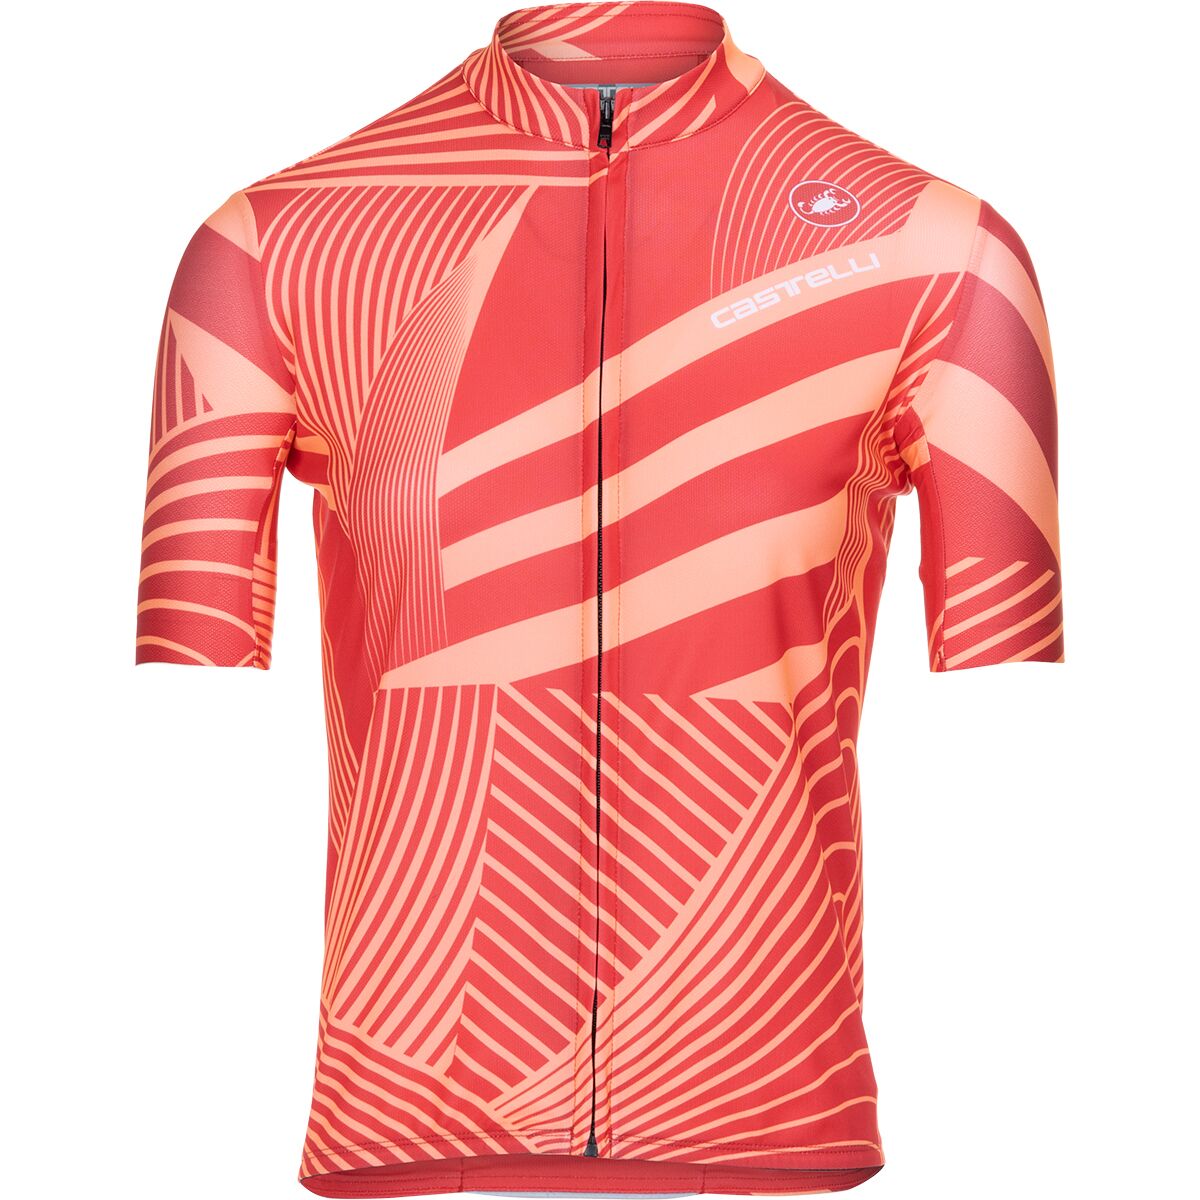 Castelli Sublime Limited Edition Jersey - Women's Hibiscus/Coral Flash, S